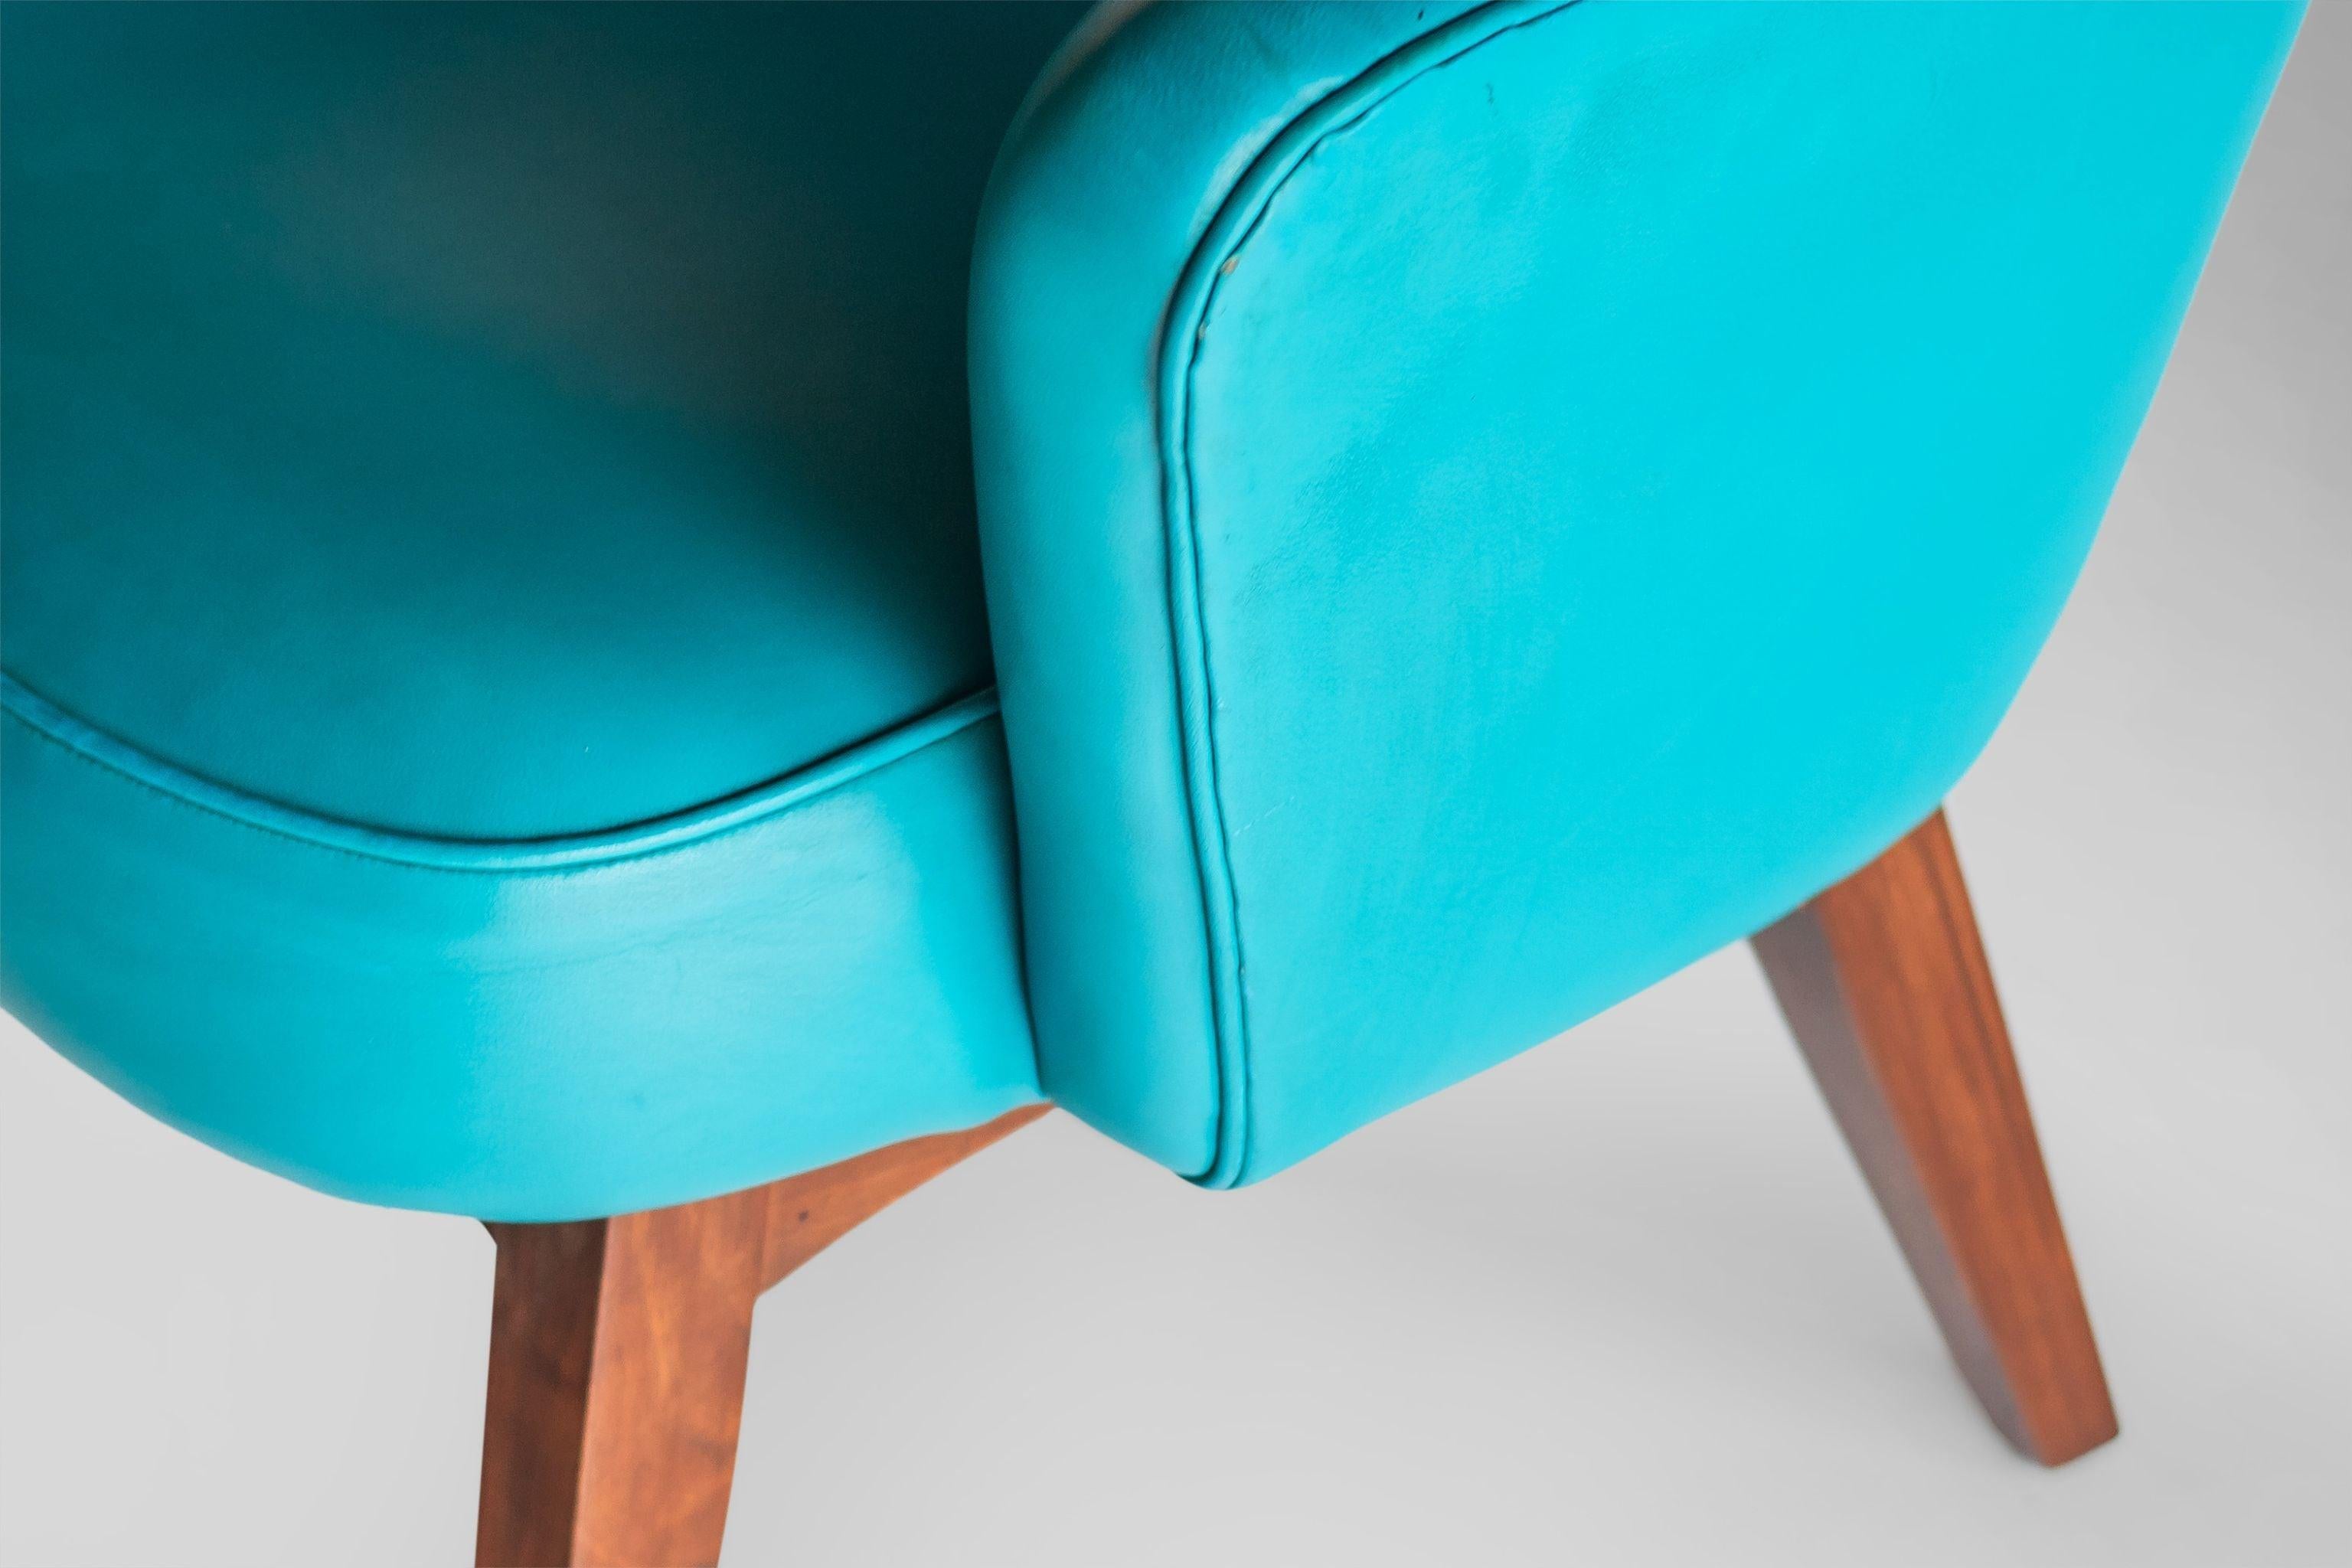 Found in original teal vinyl. Set of walnut bases. An iconic and hard to find model by Patrician Furniture. Circa 1960s.

---Dimensions---

Width: 26.5 in / 67.31 cm
Depth: 26 in / 66.04 cm
Height: 30 in / 76.2 cm
Seat Height: 16.25 in / 41.28